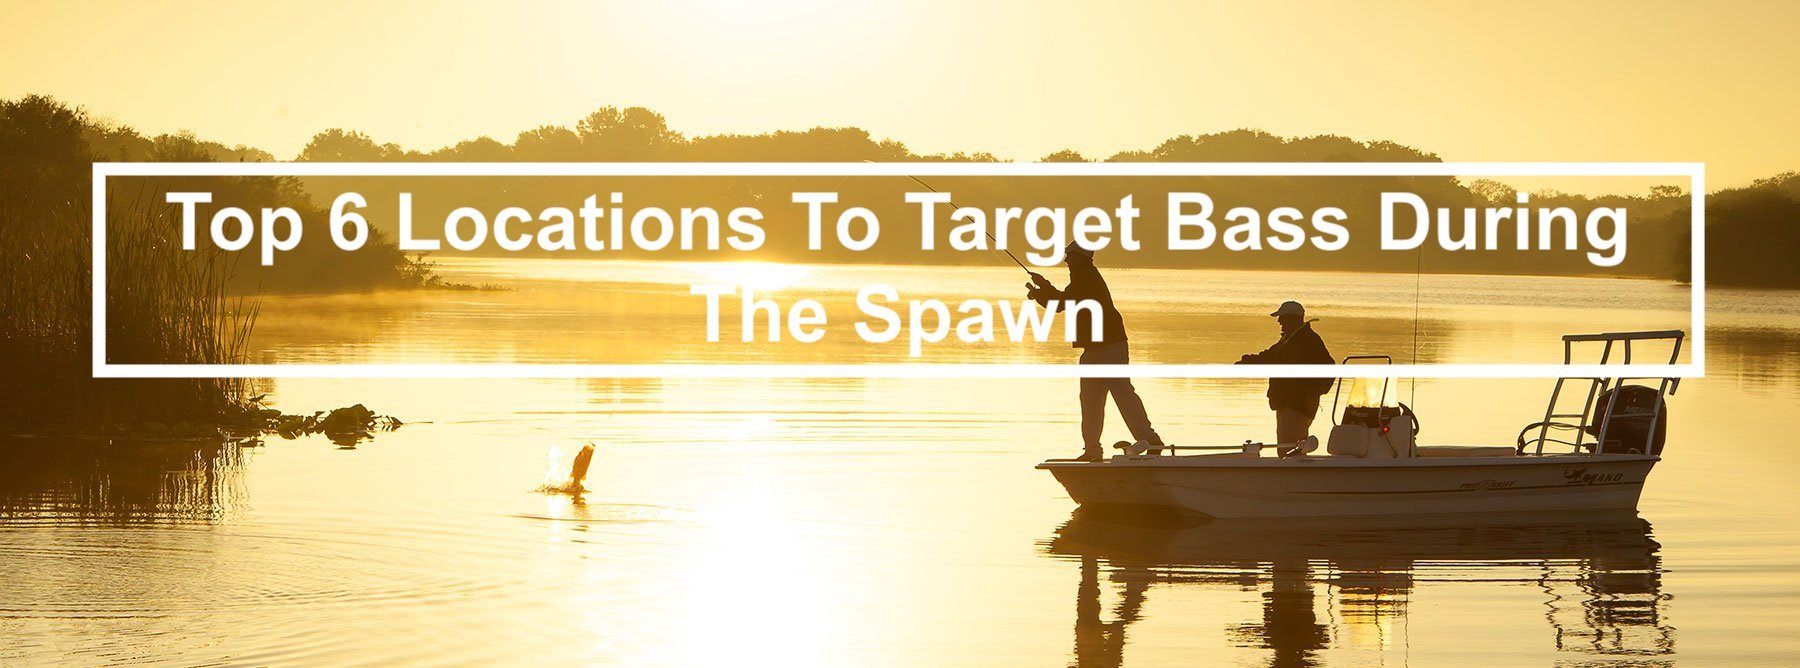 Top 6 Locations To Target Bass During The Spawn